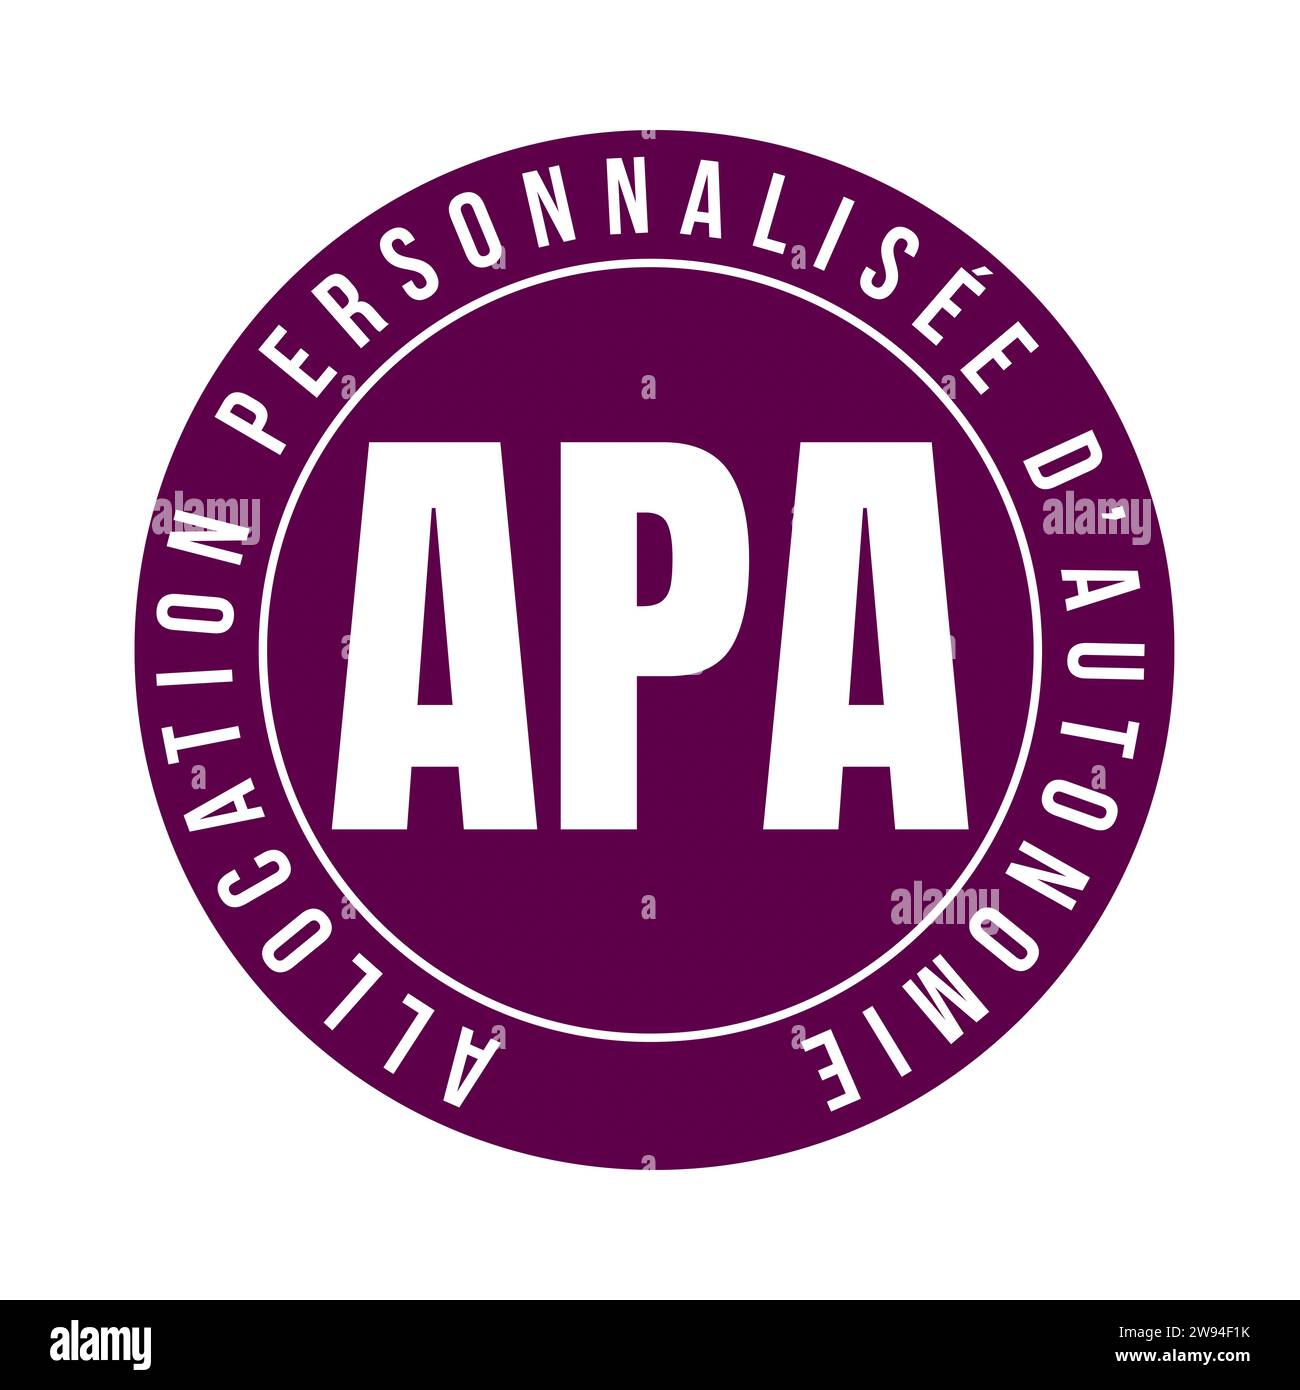 Personalized autonomy allowance symbol icon called APA allocation personnalisee d'autonomie in French language Stock Photo